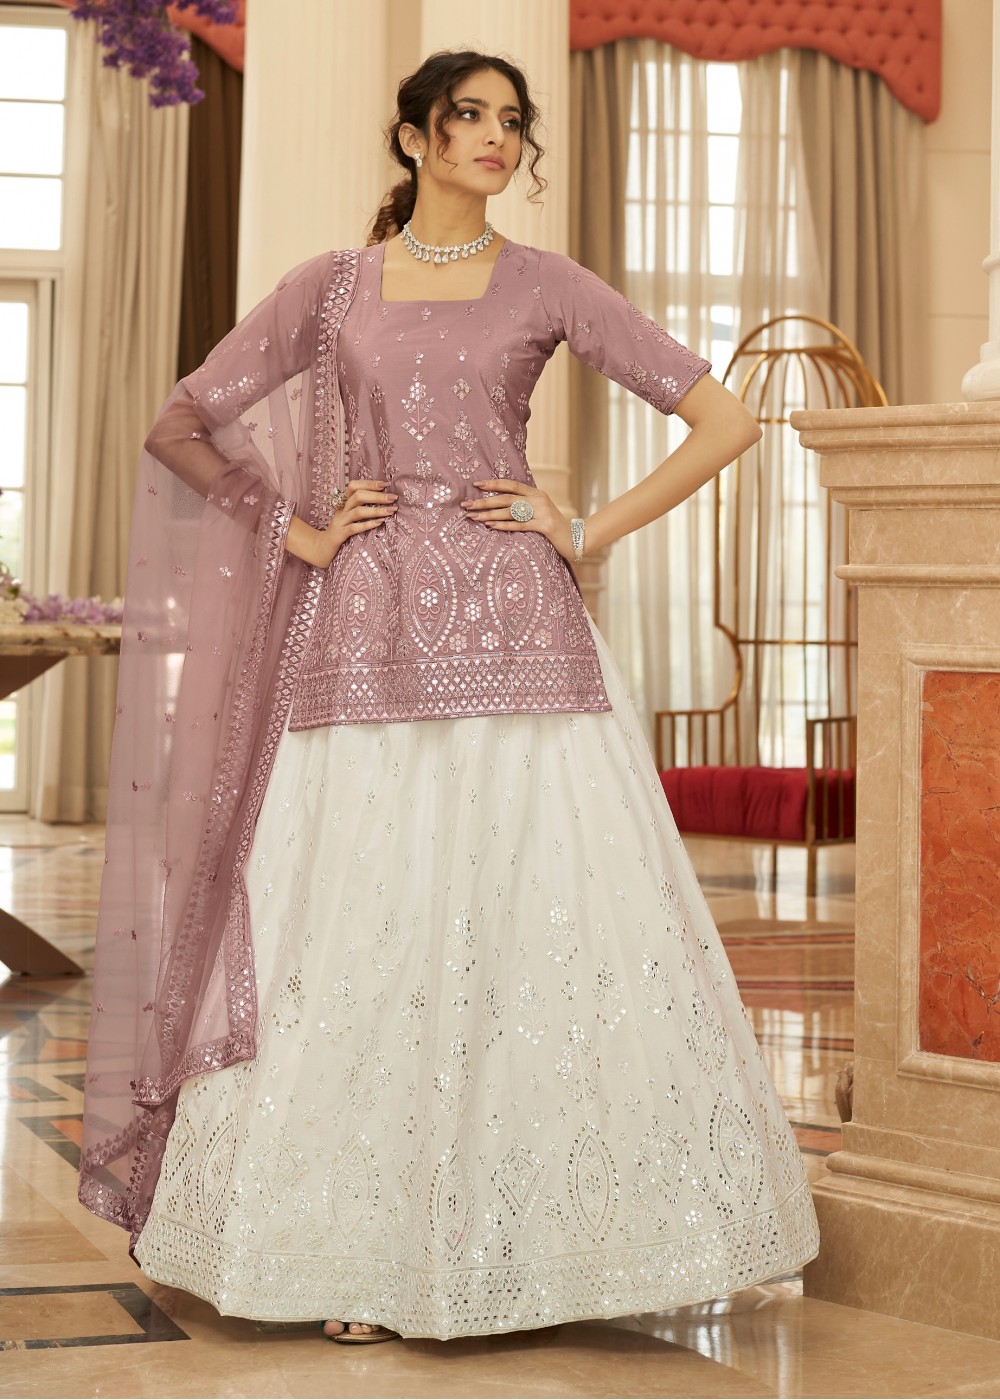 Winstwist Embroidered Semi Stitched Lehenga Choli - Buy Winstwist  Embroidered Semi Stitched Lehenga Choli Online at Best Prices in India |  Flipkart.com